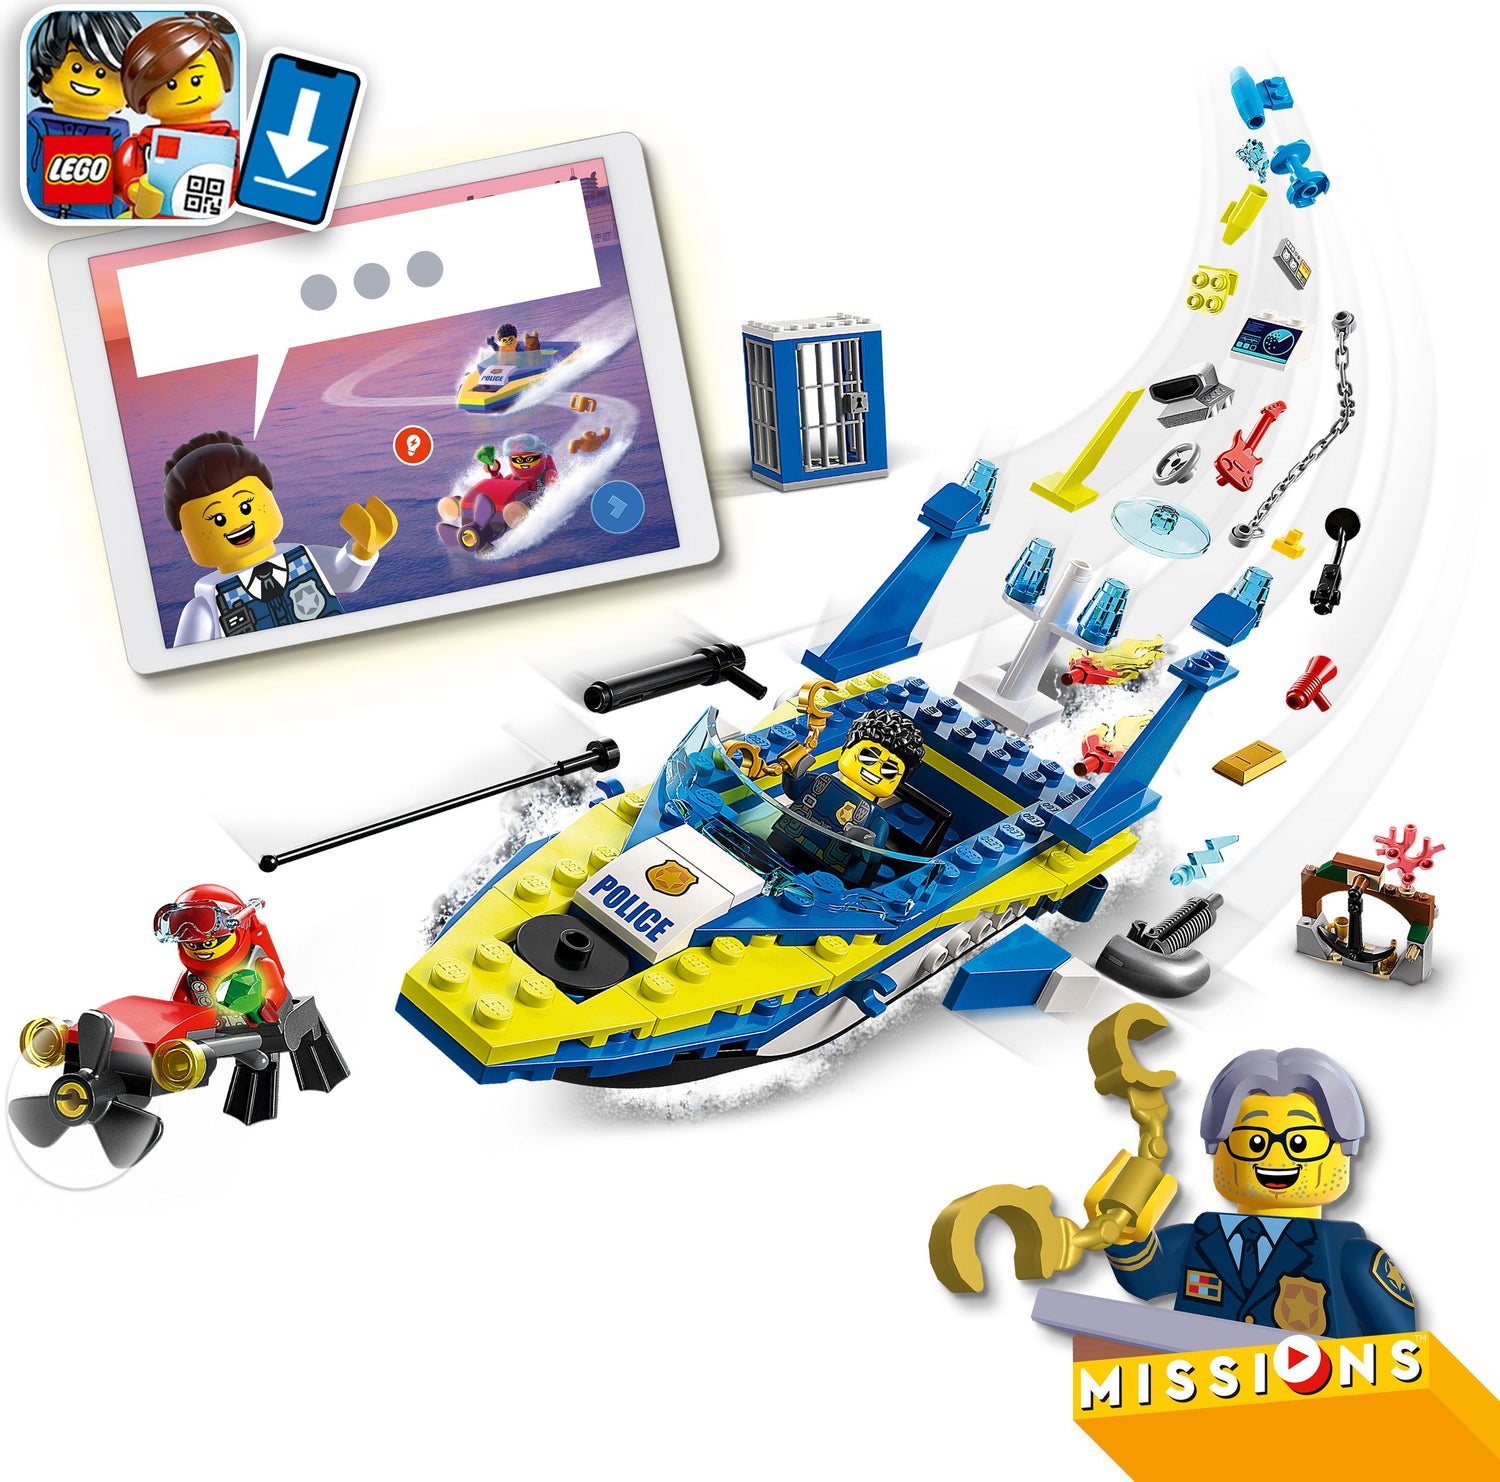 LEGO® City Water Police Detective Missions Set